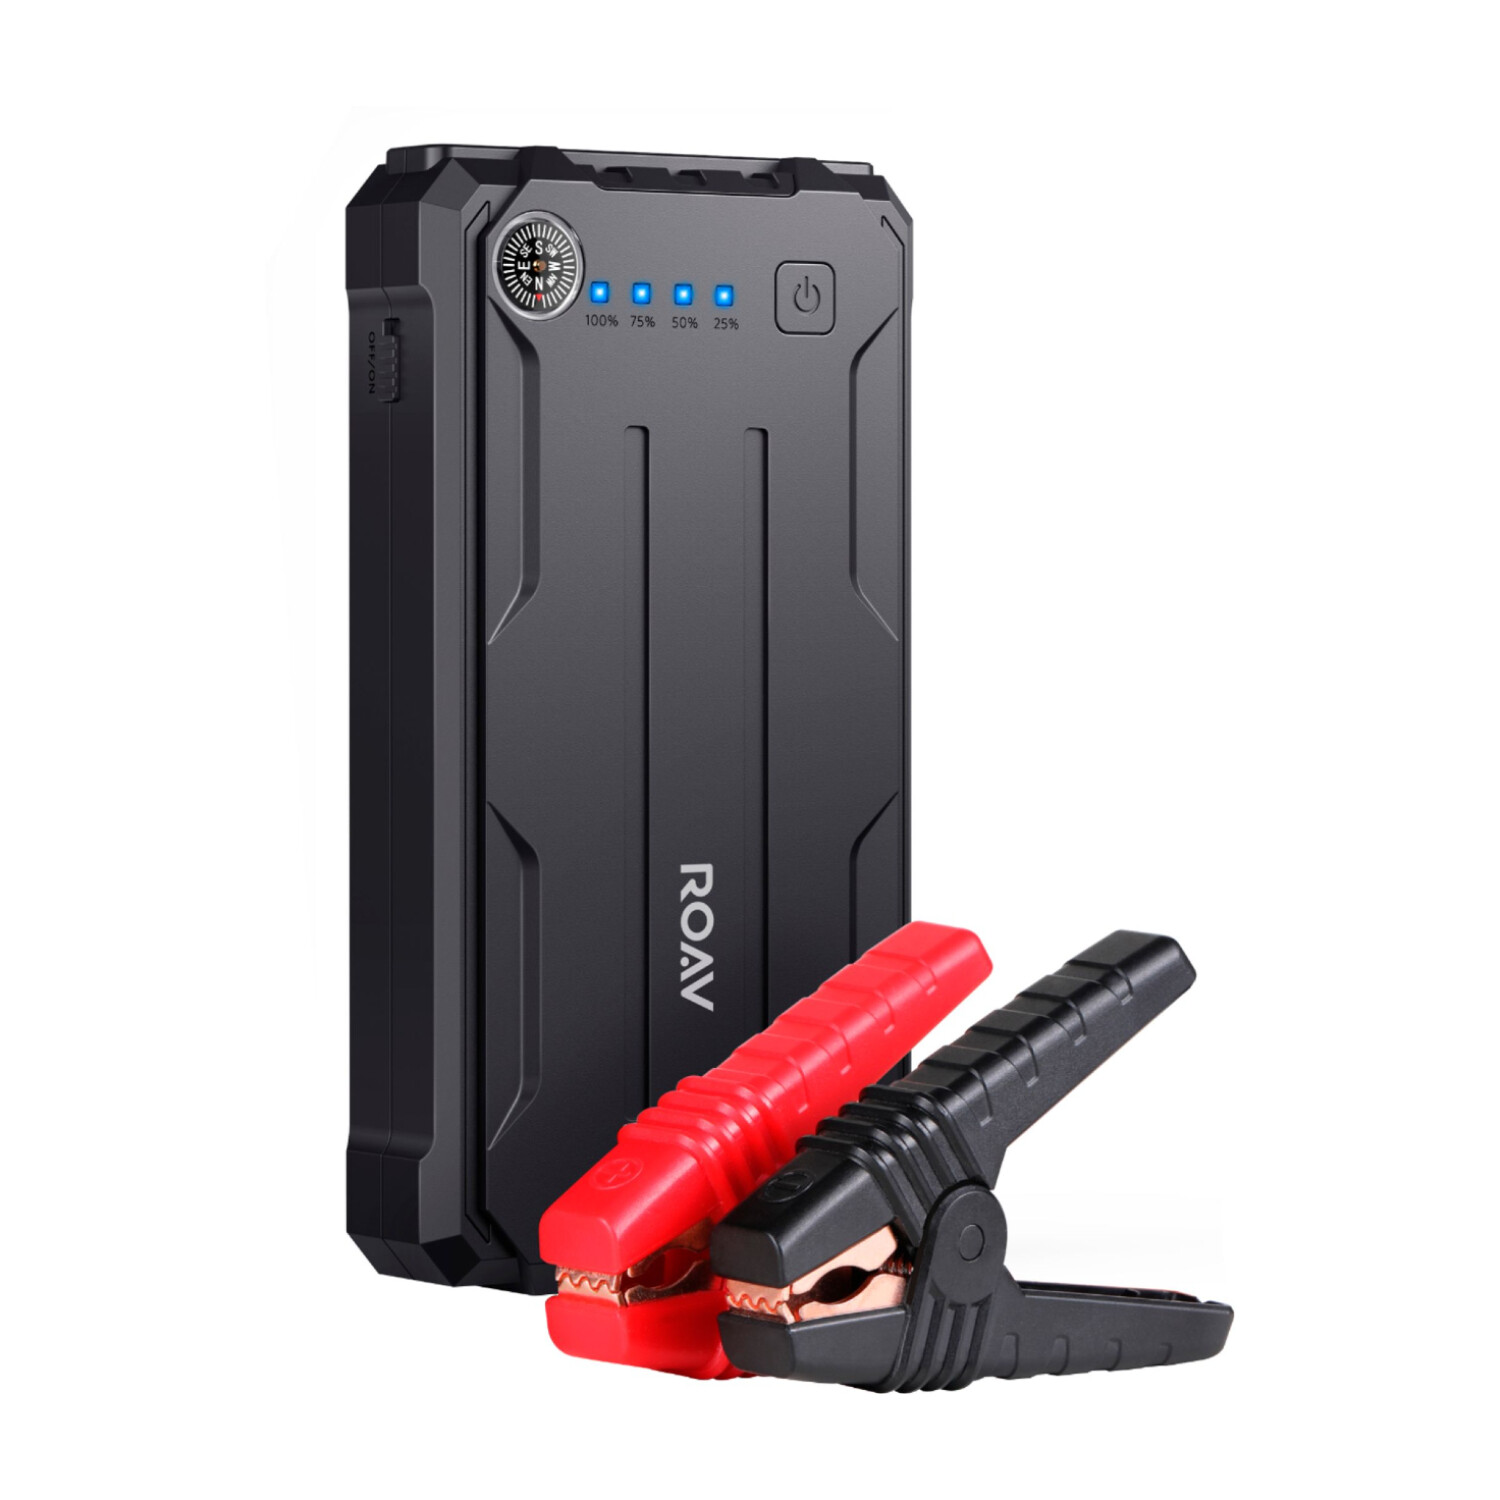 Anker Roav Jump Starter Pro - 2-in-1 Jump Starter and Portable Charger for larger Engines